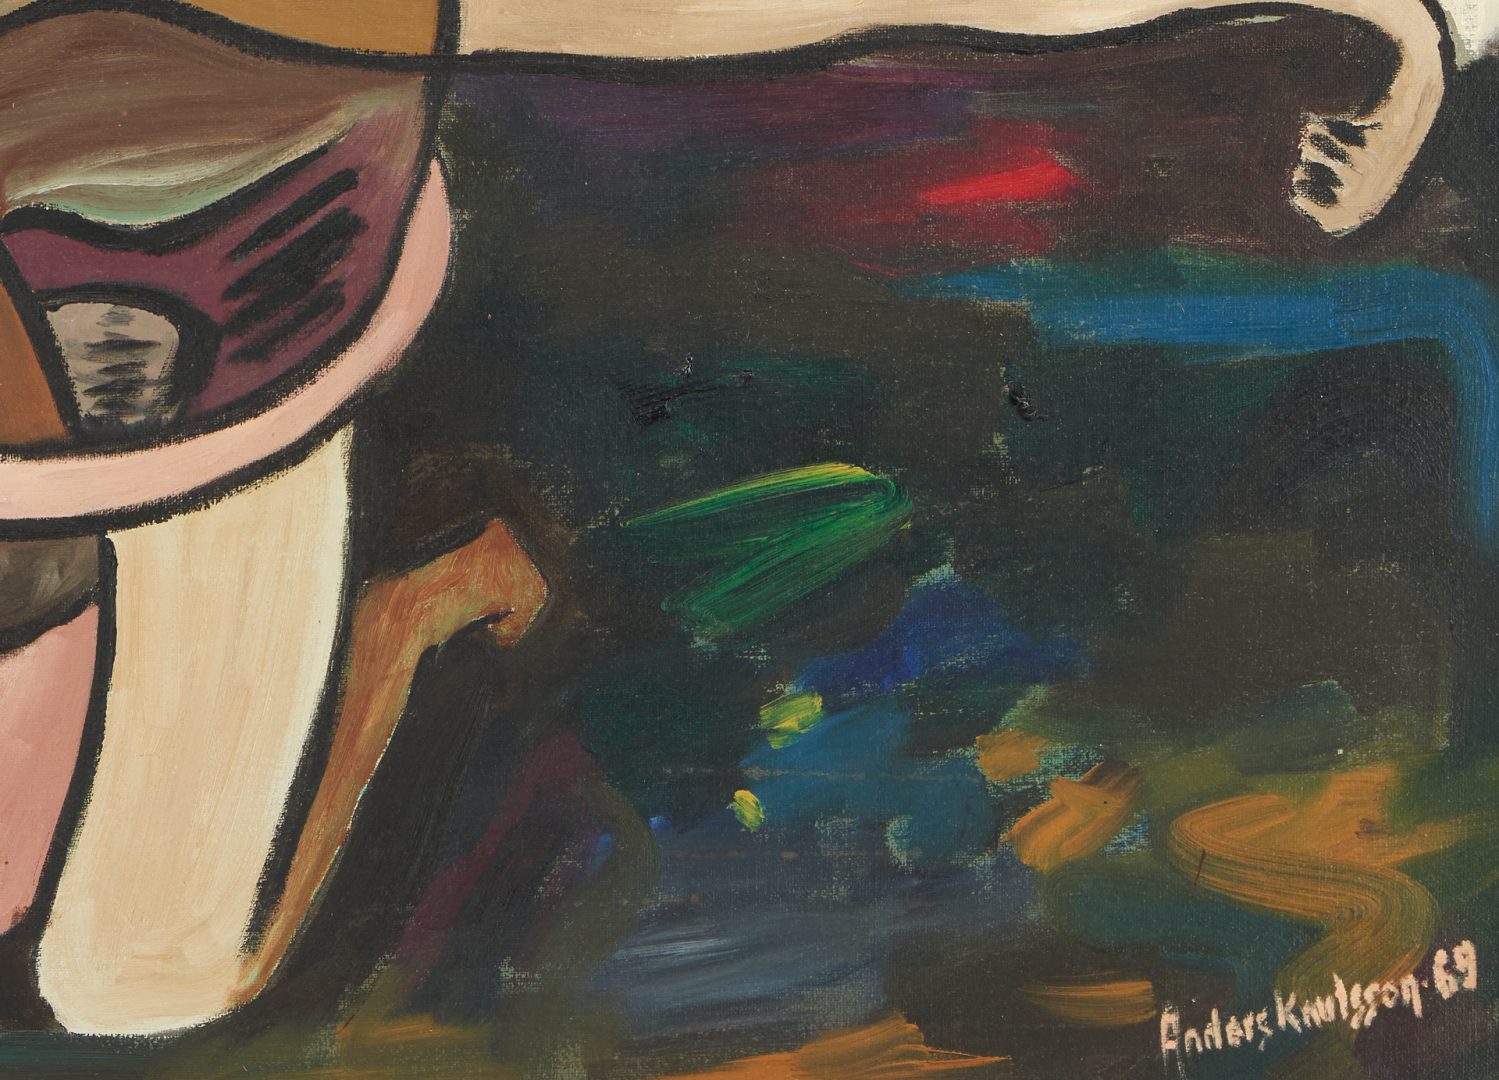 Lot 589: Exhibited 1969 Anders Knutsson Oil Abstract Painting, He Died For Mankind